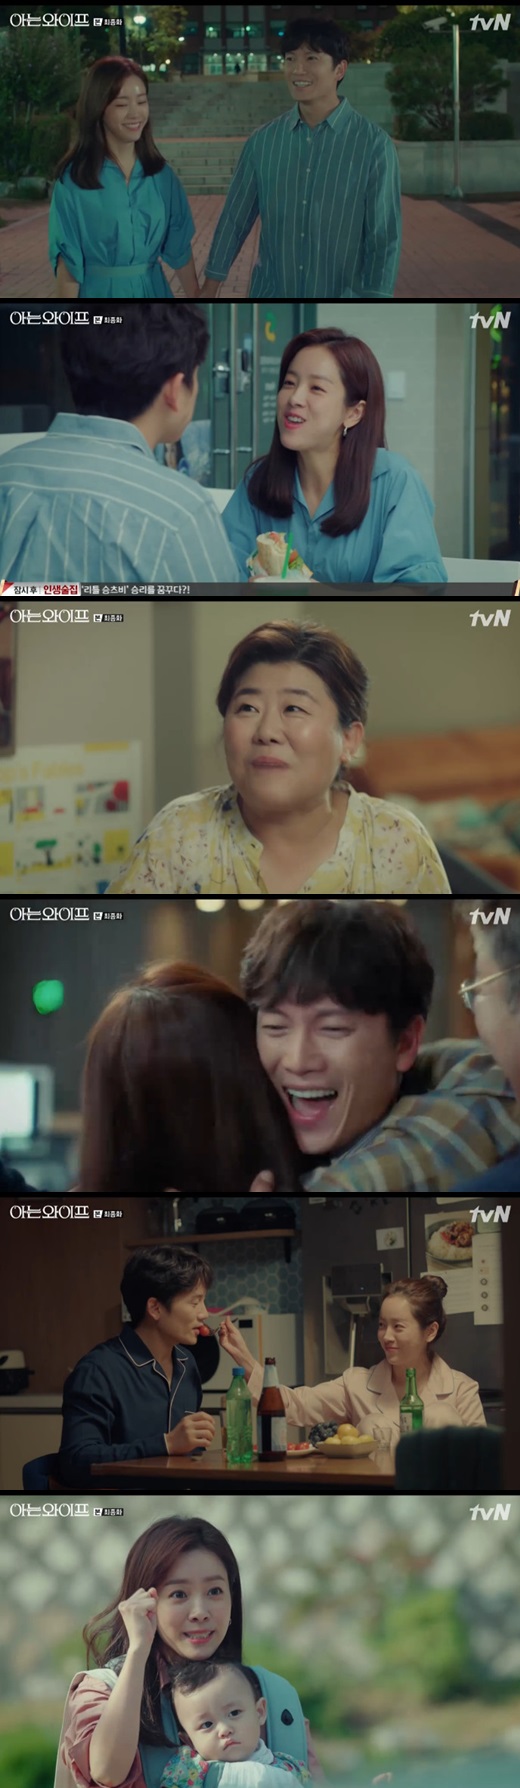 Knowing Wife Ji Sung and Han Ji-min showed perfect Happy Endingss.The 16th (last episode) of the cable channel tvNs drama Knowing Wife (playplayed by Yang Hee-seung, directed by Lee Sang-yeop) broadcast on the night of the 20th, depicted the Happy Endings of Cha Ju-hyuk (Ji Sung) and Seo Woojin (Han Ji-min).Joo Hyuk and Woojin woke up in the same bed, and then back to 2018, when the two were parents of two and had a happy smile.Joo Hyuk and Woojin, who came to the bank together, showed a couple breathing.Woojin was promoted to head of the team, becoming a head of the team. Joo Hyuk comforted the regret of his later acting and congratulated his wife Woojin on his promotion to head of the team.I have a broad heart like the Pacific Ocean. Thank you.Yoon Jong-hoo (Jang Seung-jo), who is already married, said, I think we are a little bored. My wife screams when we are tired.In the first episode of Knowing Wife, Joo Hyuk was suffering from the anger of his wife Woojin.I understand you. Listen to me. You have to get over this. Otherwise, its really hard. Youre always thinking about your wife.The housewife goes missing. Friends like they used to meet, they want to be pretty and decorating, but its not easy.Of course, I have to be depressed, he said, trying to look into his wifes mind.Joo Hyuk met Hyewon (Ganghanna) in a meeting with Friends, and Hyewon was glad to hear about the marriage.Hyewon said, I do not think I am caught, but I love you so much.Woojin, who saw a picture taken with Friends including Hye-won in the mobile phone of The Way Home, said, This woman is not old.Joo Hyuk said, I did not know Hyewon would really come, and Woojin said, I really liked to meet my wife.Then I am my current wife and my former wife, and I will sleep. Joo-hyuk went to the promotion test center, and Woojin, who was going to pick up the childs kindergarten, wasted time taking the customer to the hospital.I contacted Woojin, and Joo Hyuk did not give up the test and child pickup, but showed a fantastic breath with Woojin.Joo Hyuk was promoted to the team leader at the end of the twists and turns and shed tears of excitement.Woojin, who had abandoned the game machine earlier, came to the 16th and bought the game machine to Juhyuk, attracting attention.It is a dream wife. Jukhyuk and Woojin left their children to their mothers and enjoyed their happy date and showed perfect Happy Endingss.